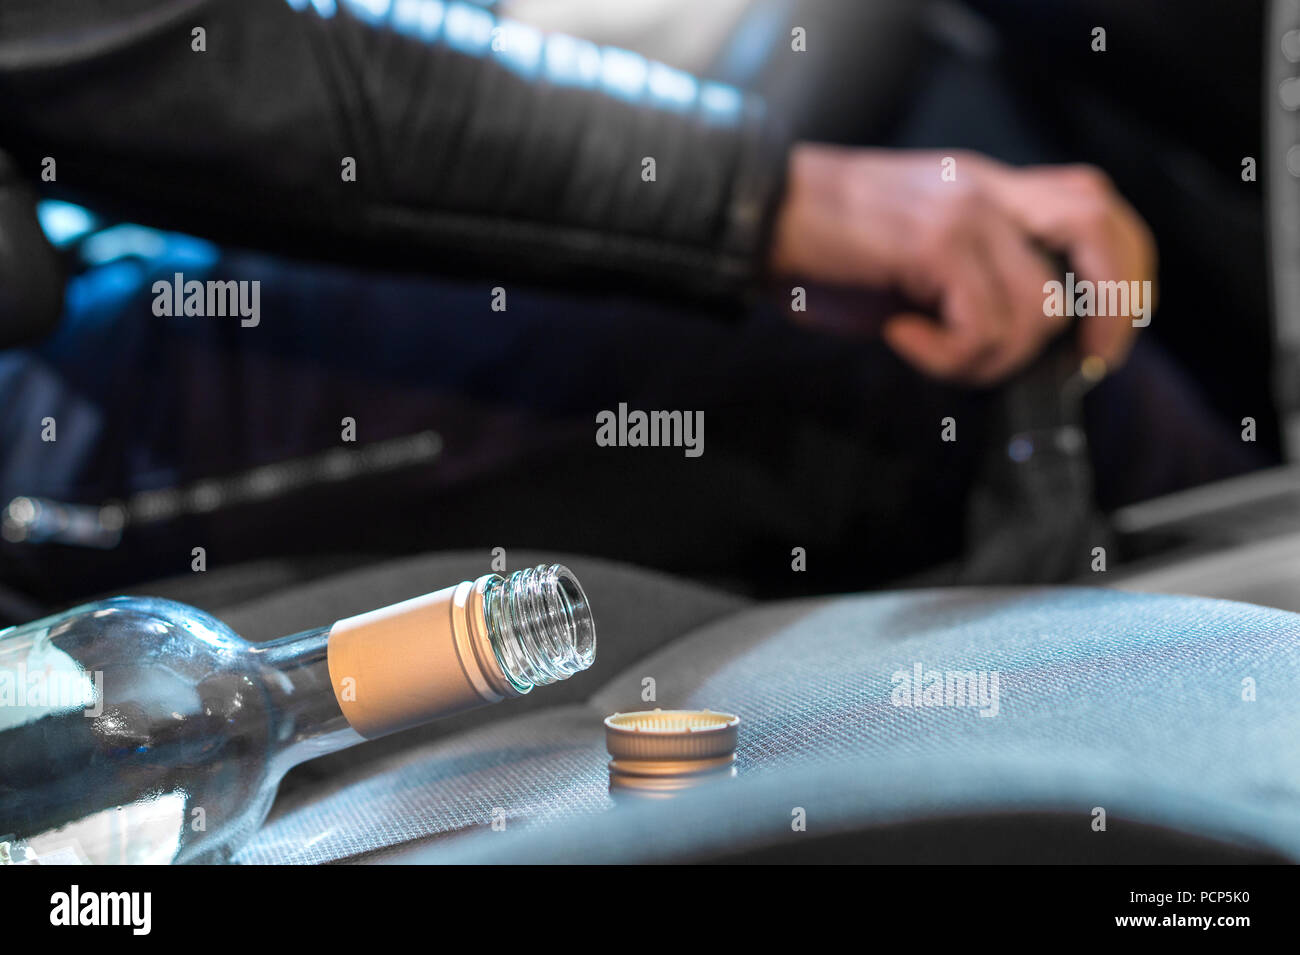 Drunk driving concept. Young man driving car under the influence of alcohol. Hand on gear stick. Close up of empty bottle of wine on front seat. Stock Photo